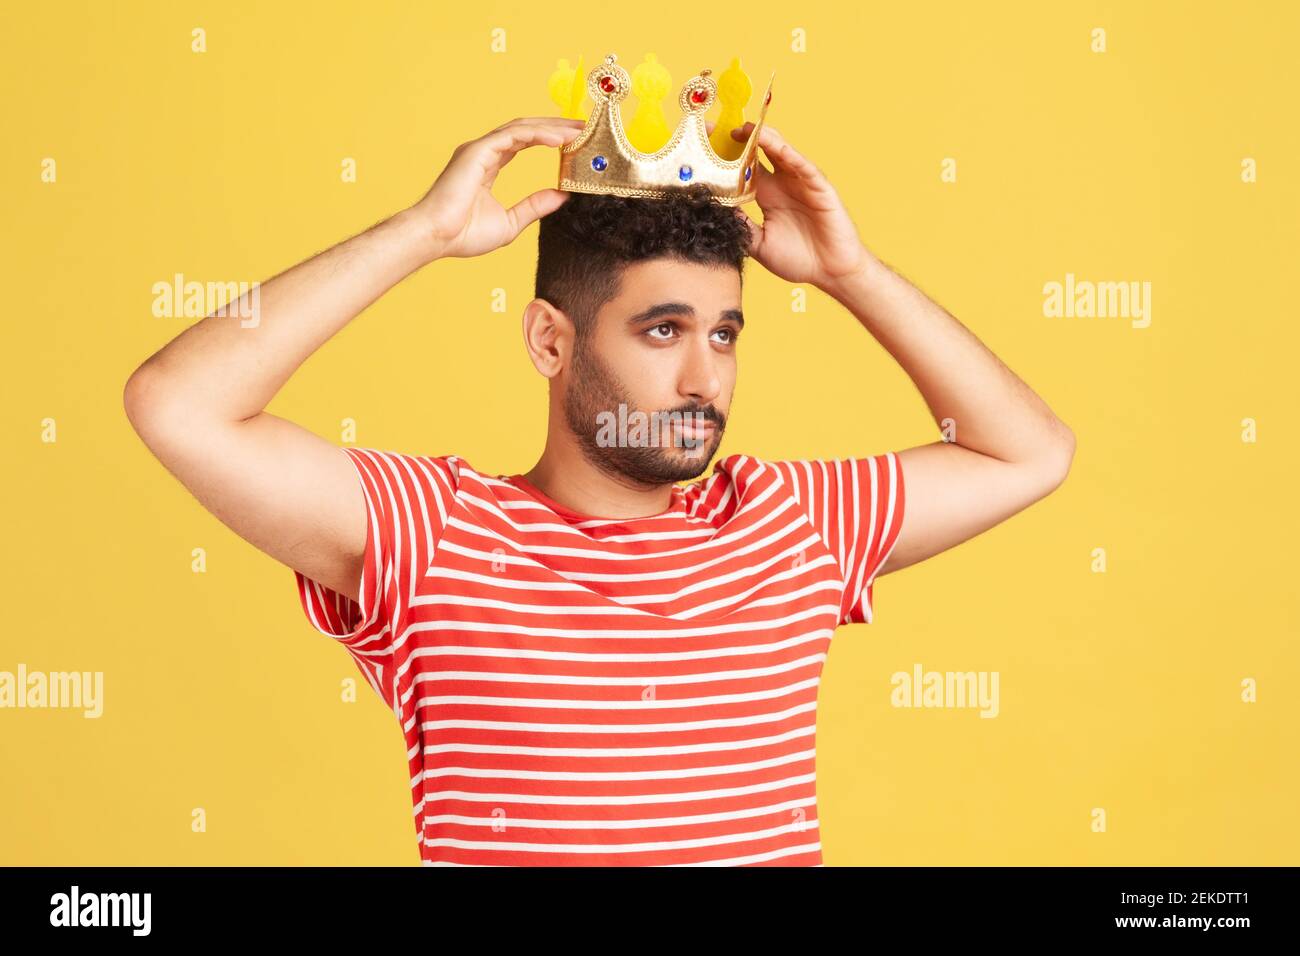 Ambitious bearded man wearing golden crown, imagining promotion at work to position of top manager or boss, looking with arrogance, privileged status. Stock Photo